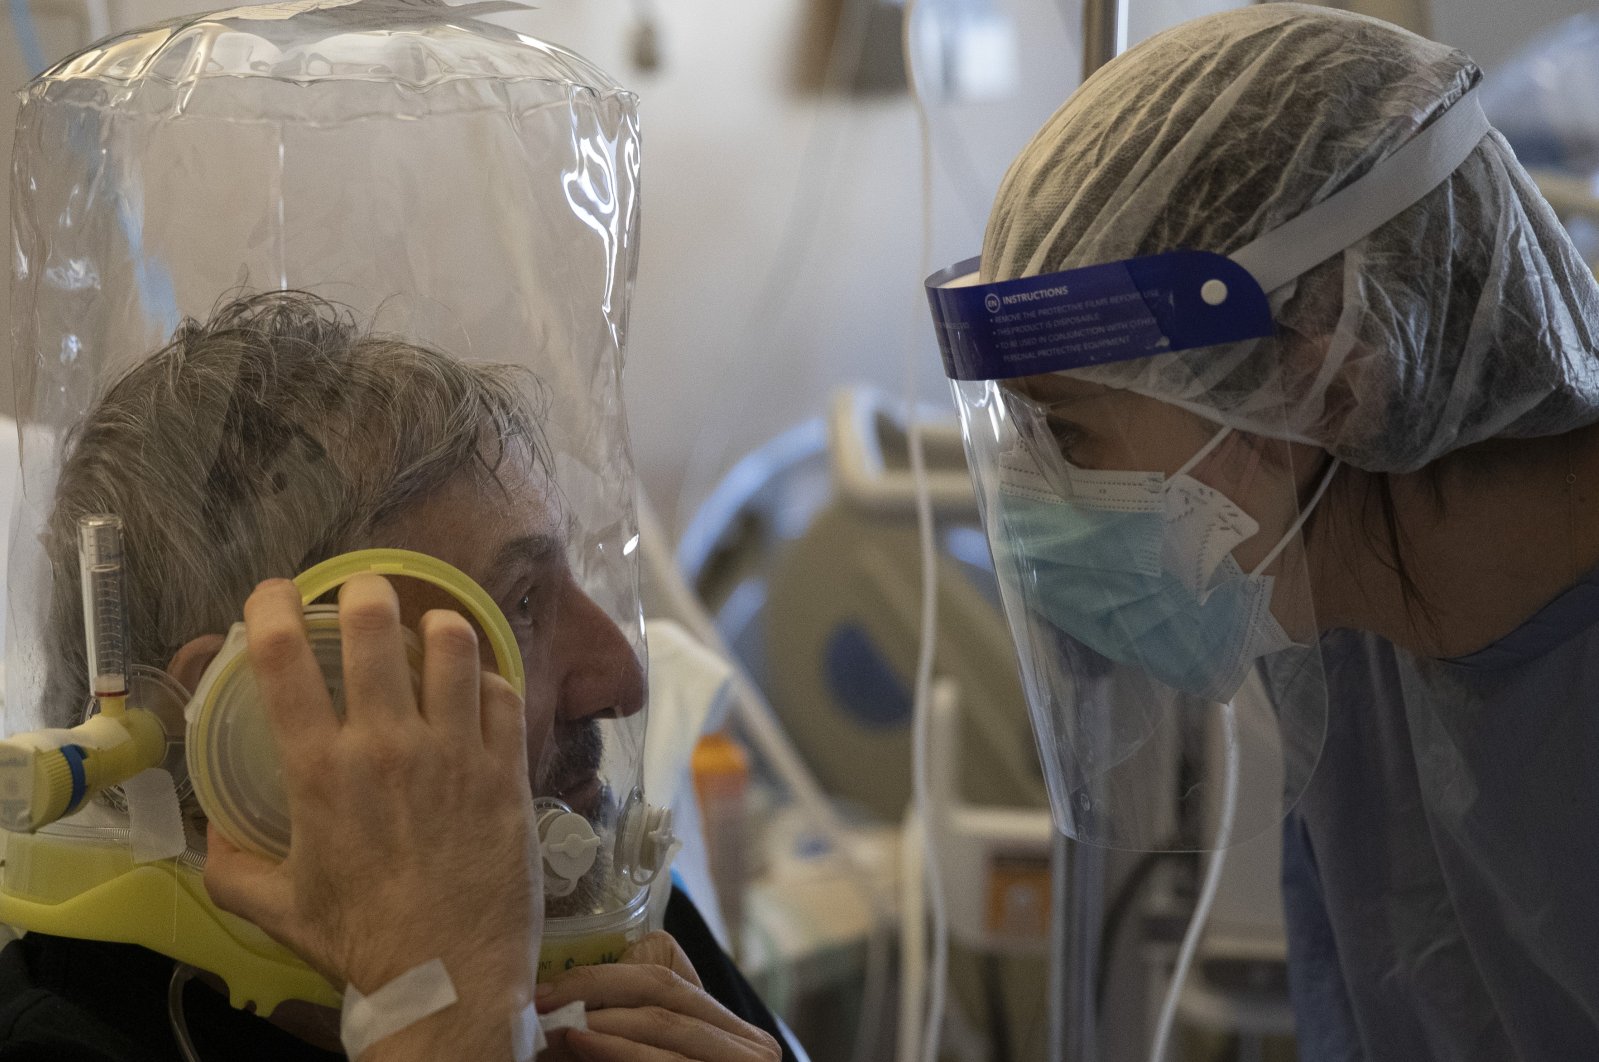 A patient breathing under oxygen CPAP (continuous positive air pressure) headgear ventilation talks to a doctor in the sub-intensive COVID-19 unit of the Tor Vergata Polyclinic Hospital, in Rome, Nov. 7, 2020. (AP Photo)